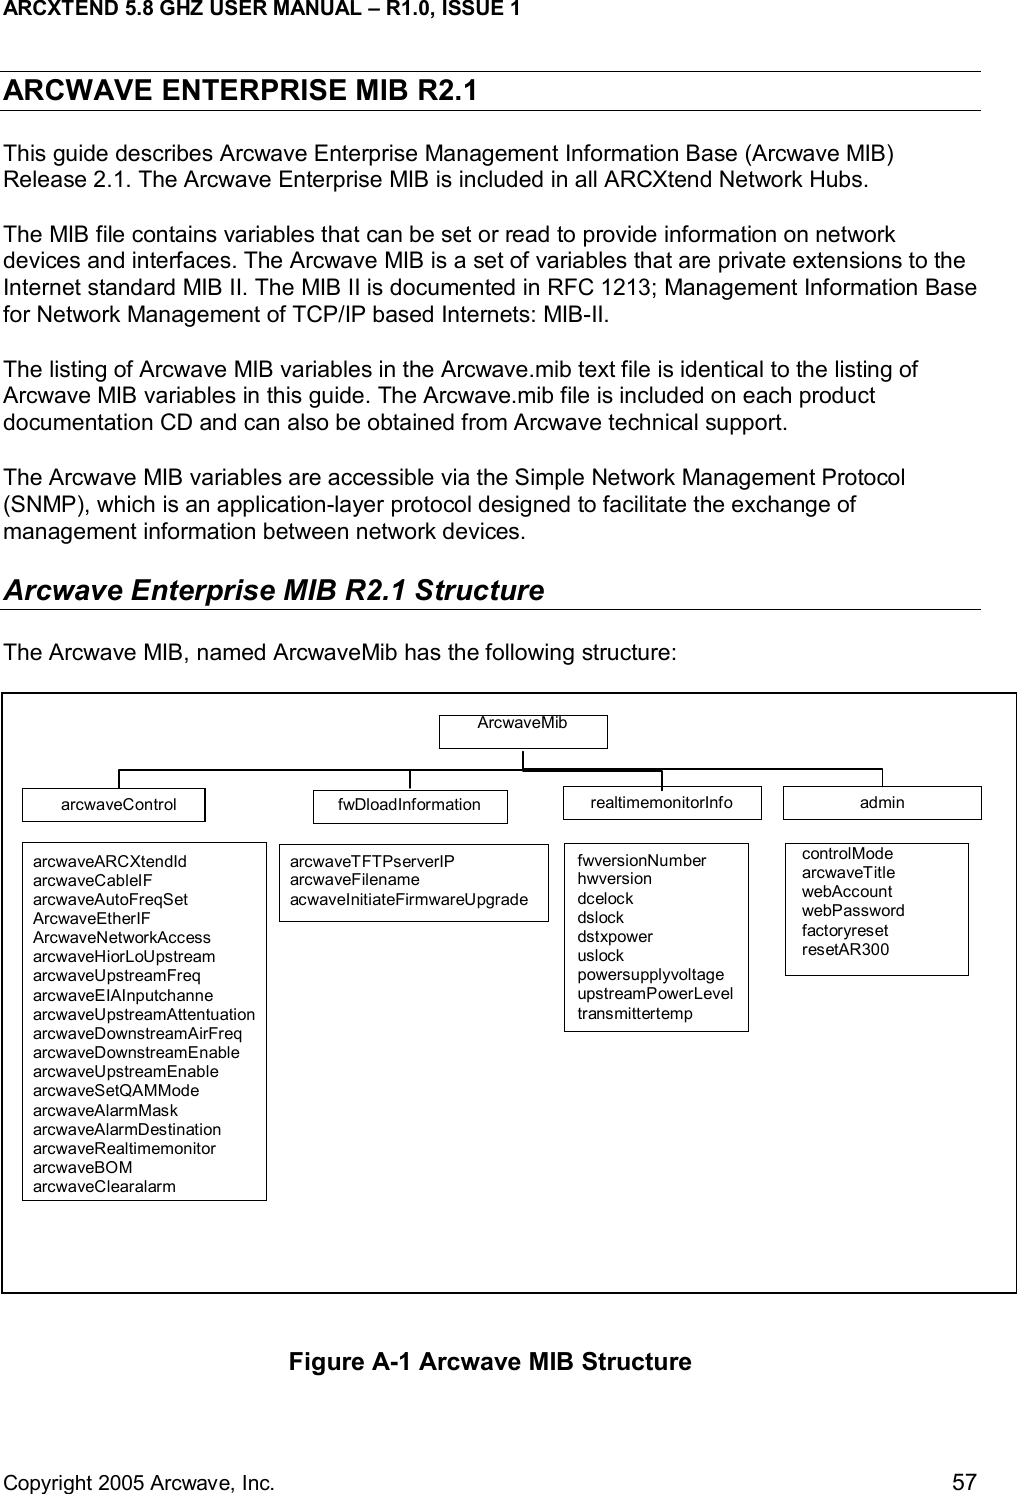 ARCXTEND 5.8 GHZ USER MANUAL – R1.0, ISSUE 1  Copyright 2005 Arcwave, Inc.    57 ARCWAVE ENTERPRISE MIB R2.1 This guide describes Arcwave Enterprise Management Information Base (Arcwave MIB) Release 2.1. The Arcwave Enterprise MIB is included in all ARCXtend Network Hubs.  The MIB file contains variables that can be set or read to provide information on network devices and interfaces. The Arcwave MIB is a set of variables that are private extensions to the Internet standard MIB II. The MIB II is documented in RFC 1213; Management Information Base for Network Management of TCP/IP based Internets: MIB-II.  The listing of Arcwave MIB variables in the Arcwave.mib text file is identical to the listing of Arcwave MIB variables in this guide. The Arcwave.mib file is included on each product documentation CD and can also be obtained from Arcwave technical support. The Arcwave MIB variables are accessible via the Simple Network Management Protocol (SNMP), which is an application-layer protocol designed to facilitate the exchange of management information between network devices.  Arcwave Enterprise MIB R2.1 Structure The Arcwave MIB, named ArcwaveMib has the following structure:   Figure A-1 Arcwave MIB Structure  ArcwaveMibarcwaveControl  fwDloadInformation  realtimemonitorInfo arcwaveARCXtendId arcwaveCableIF arcwaveAutoFreqSet ArcwaveEtherIF ArcwaveNetworkAccess arcwaveHiorLoUpstream arcwaveUpstreamFreq arcwaveEIAInputchanne arcwaveUpstreamAttentuation arcwaveDownstreamAirFreq arcwaveDownstreamEnable arcwaveUpstreamEnable arcwaveSetQAMMode arcwaveAlarmMask arcwaveAlarmDestination arcwaveRealtimemonitor arcwaveBOM arcwaveClearalarm arcwaveTFTPserverIP arcwaveFilename acwaveInitiateFirmwareUpgrade   fwversionNumber hwversion dcelock dslock dstxpower uslock powersupplyvoltage upstreamPowerLevel transmittertemp  admincontrolMode arcwaveTitle webAccount webPassword factoryreset resetAR300    